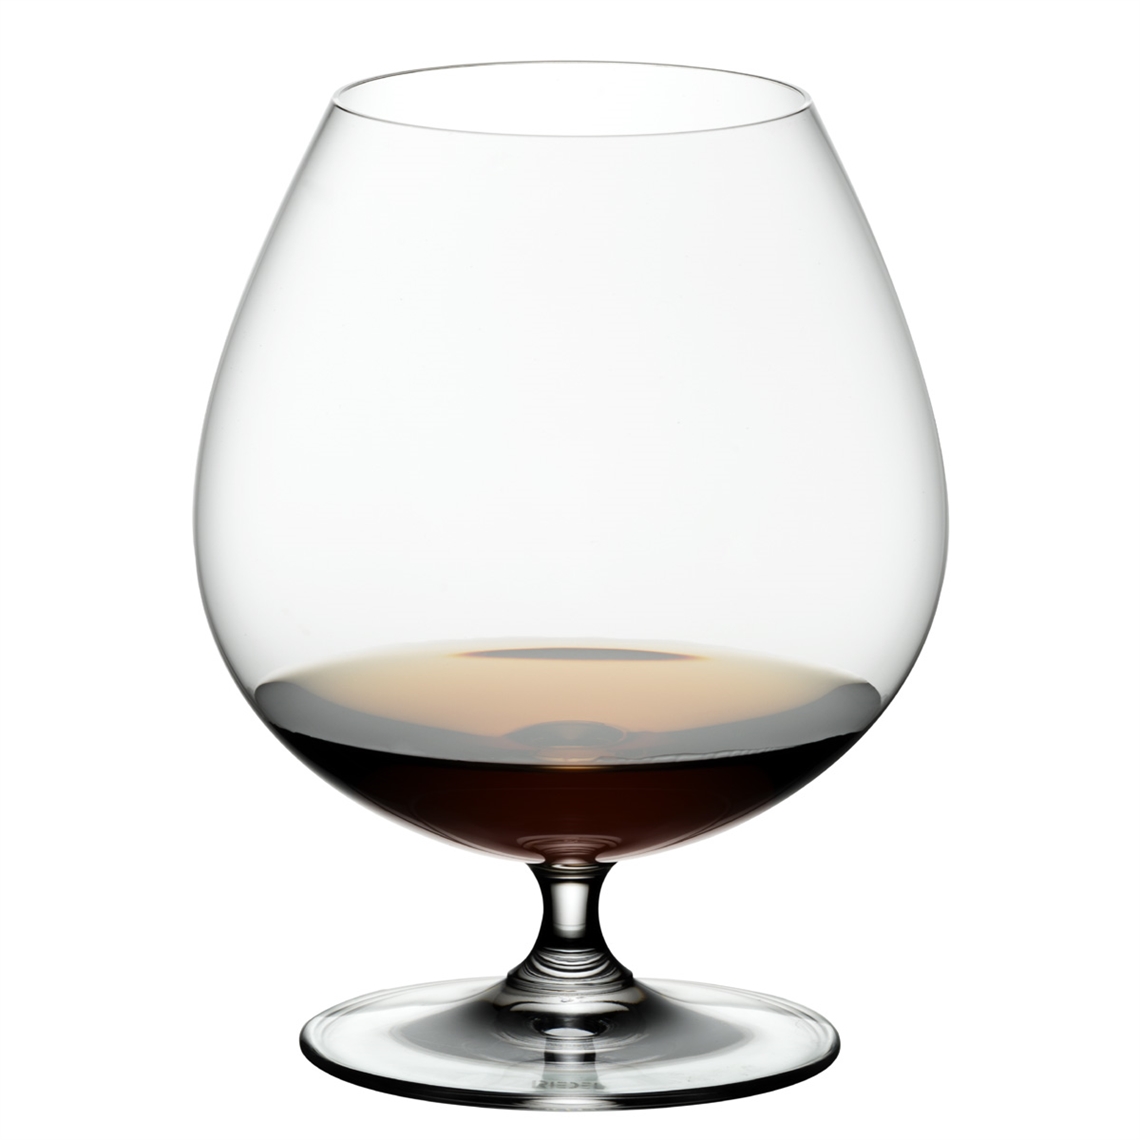 View more large wine glasses from our Spirit Glasses range